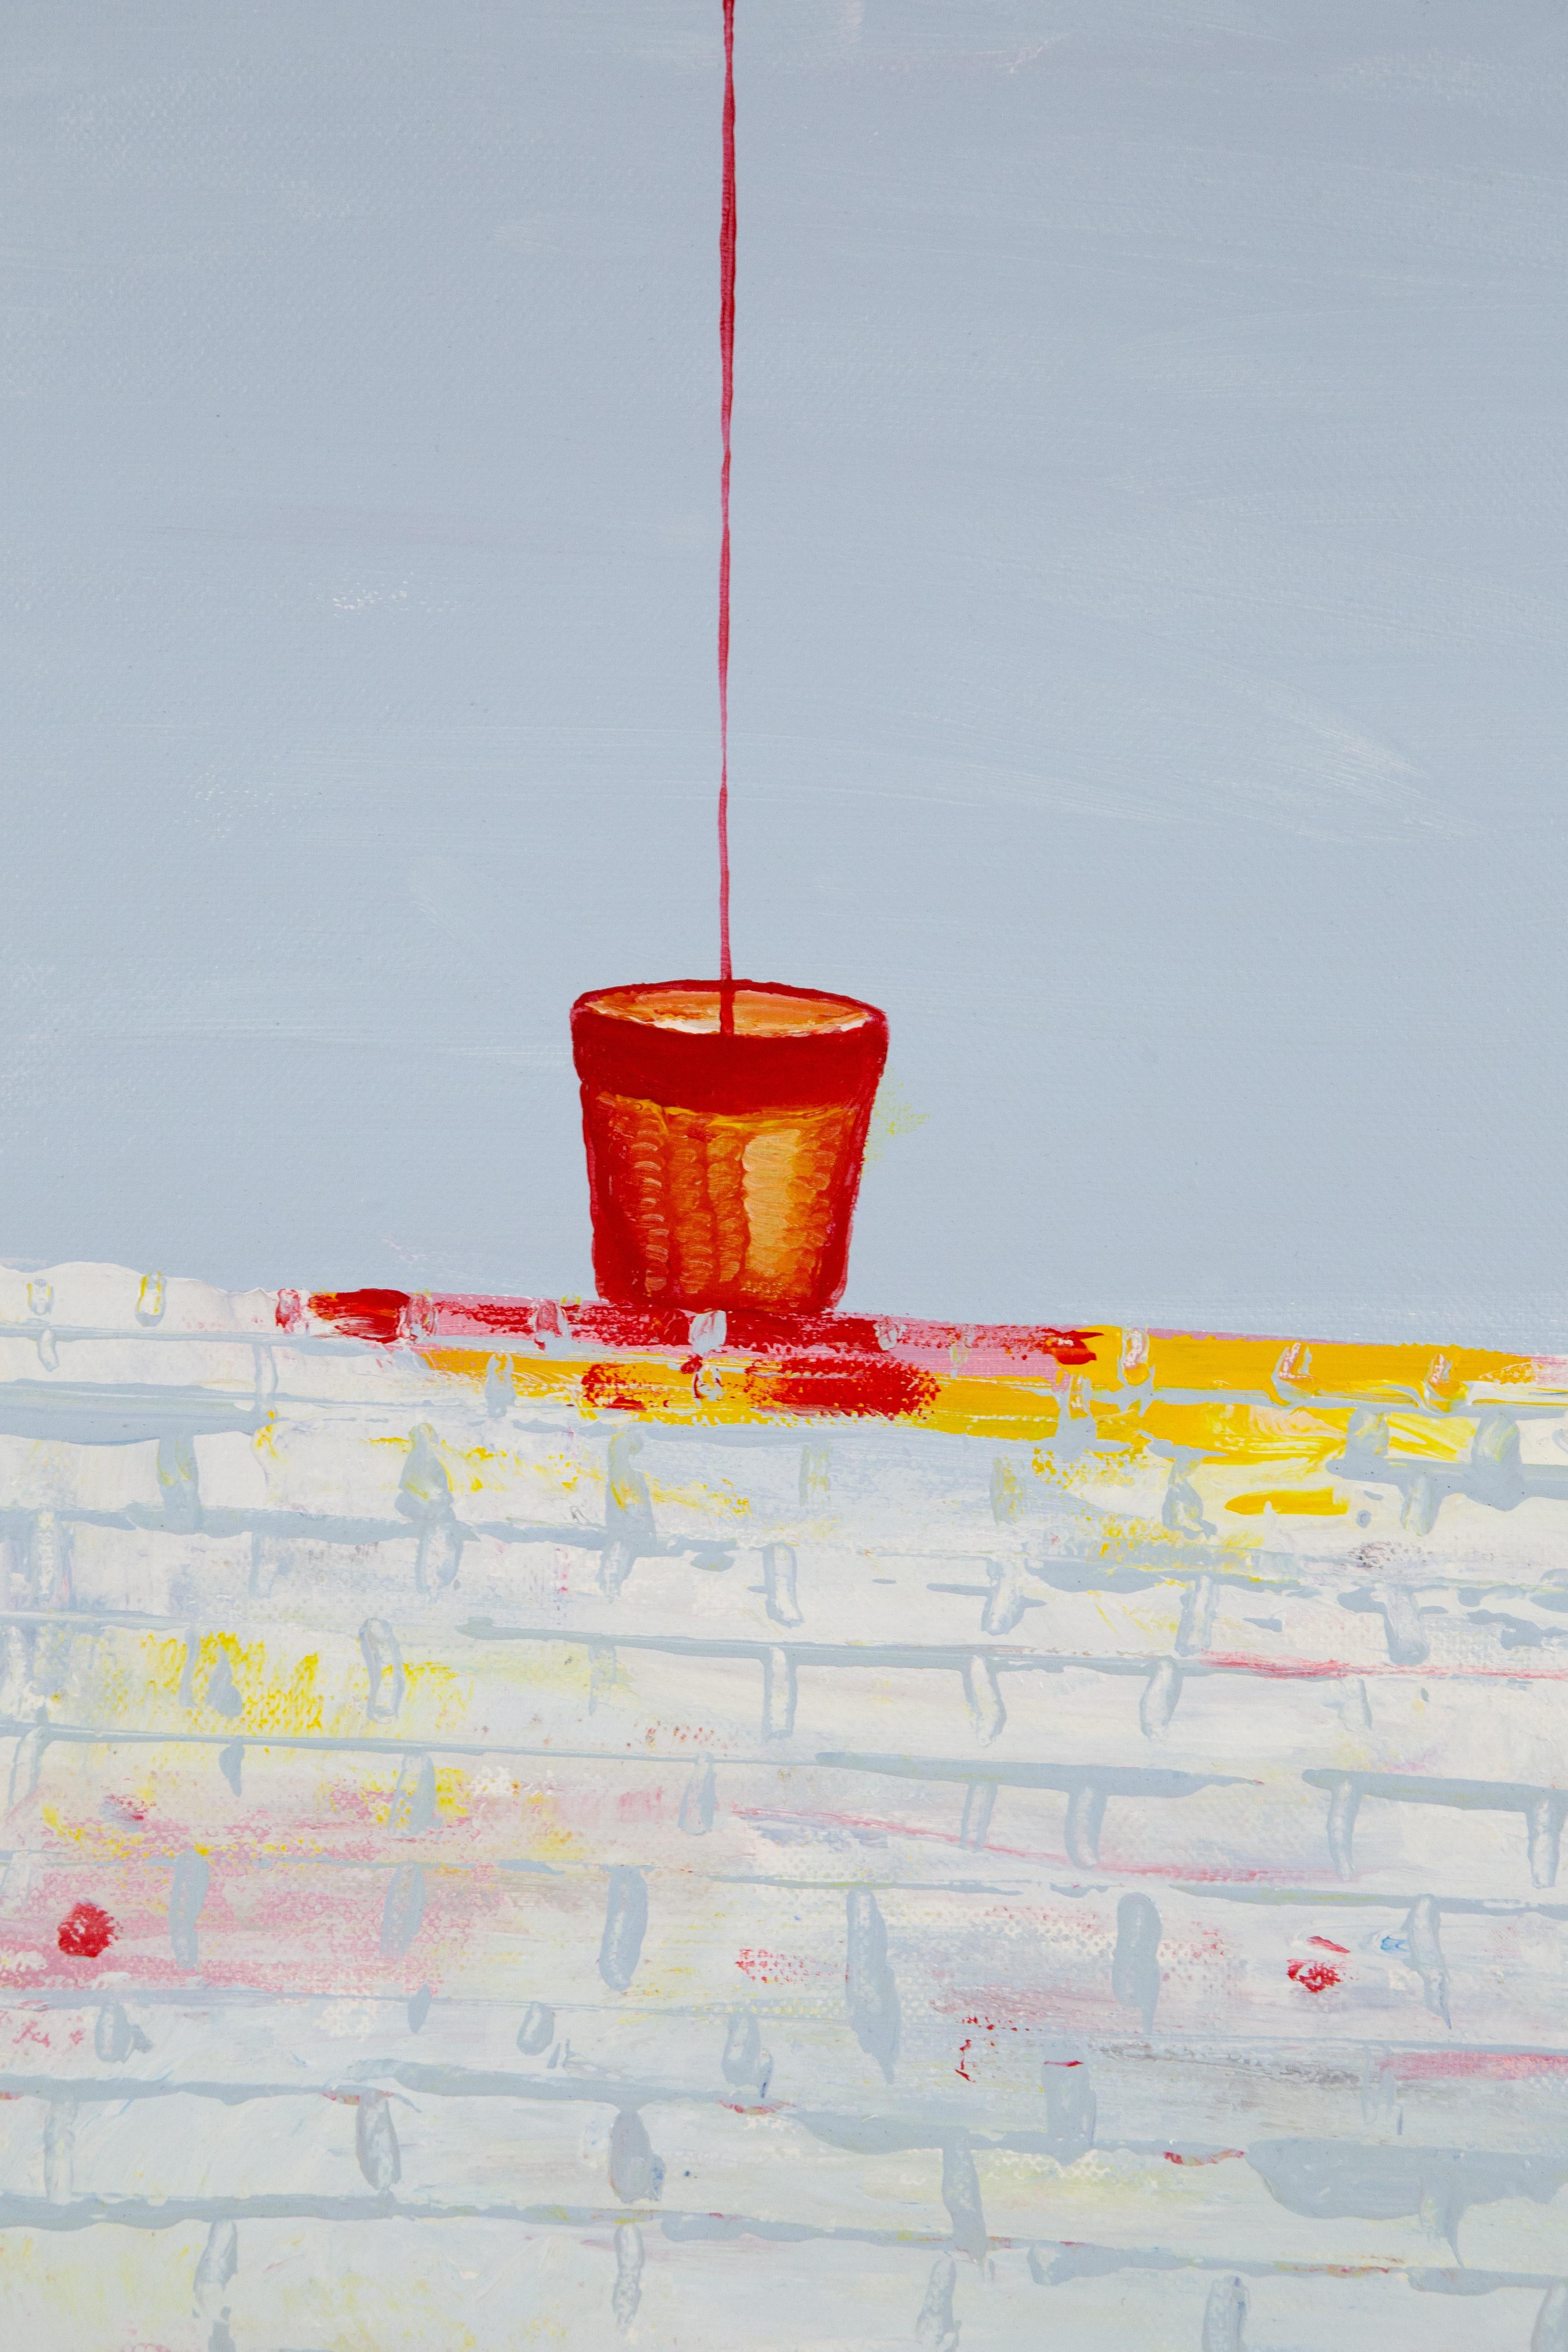  Title: Bucket With Dripping Red
 Medium: Oil on canvas
 Size: 27 x 23 inches
 Frame: Framing options available!
 
 Year: 2000 Circa
 Artist: Unclear
 Provenance: Direct from the artist.